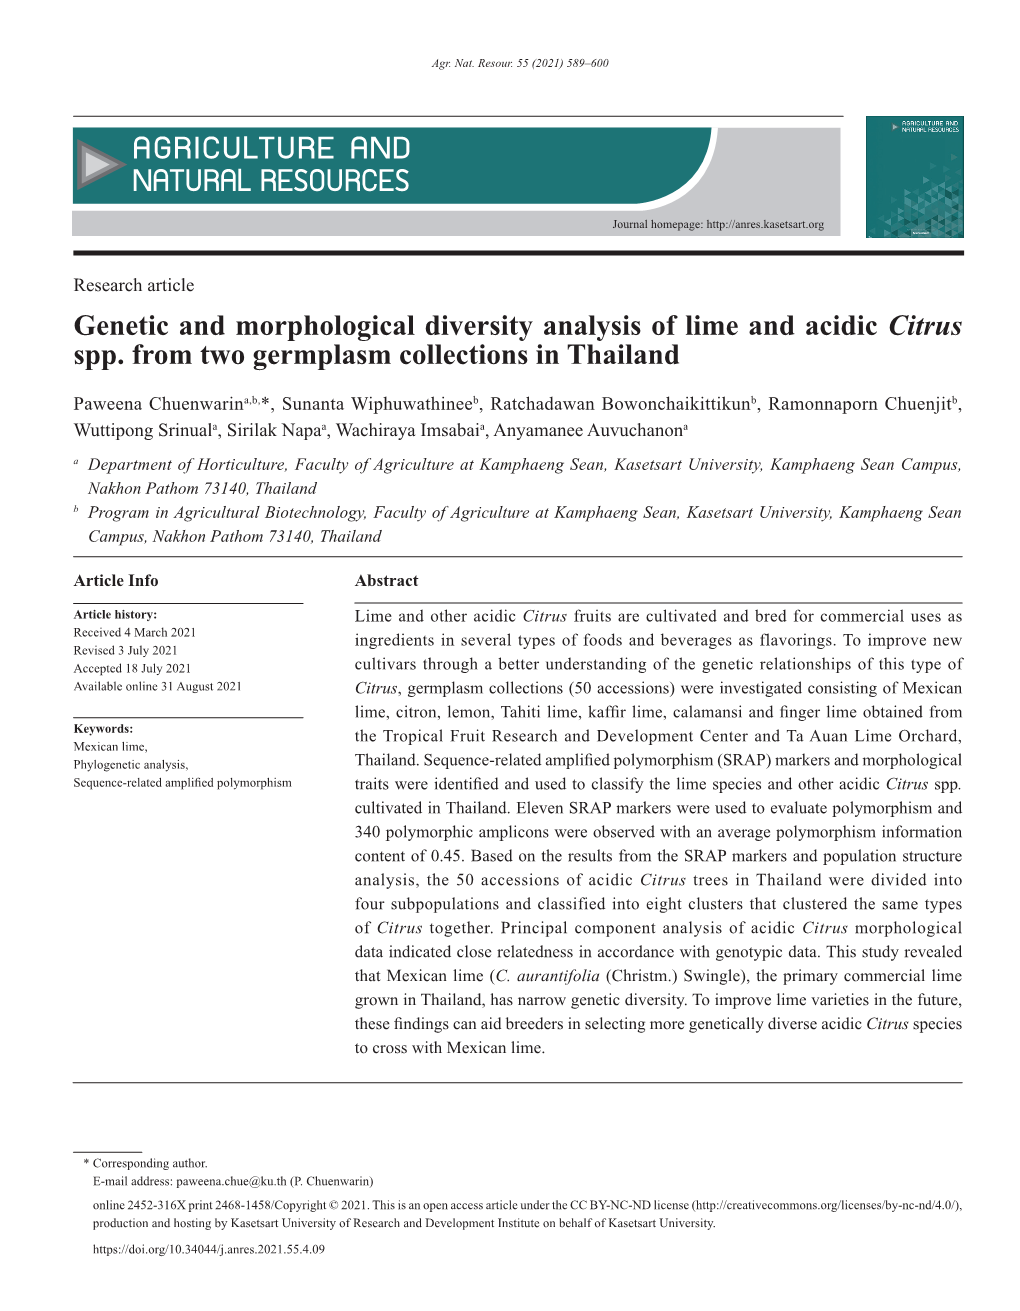 Genetic and Morphological Diversity Analysis of Lime and Acidic Citrus Spp